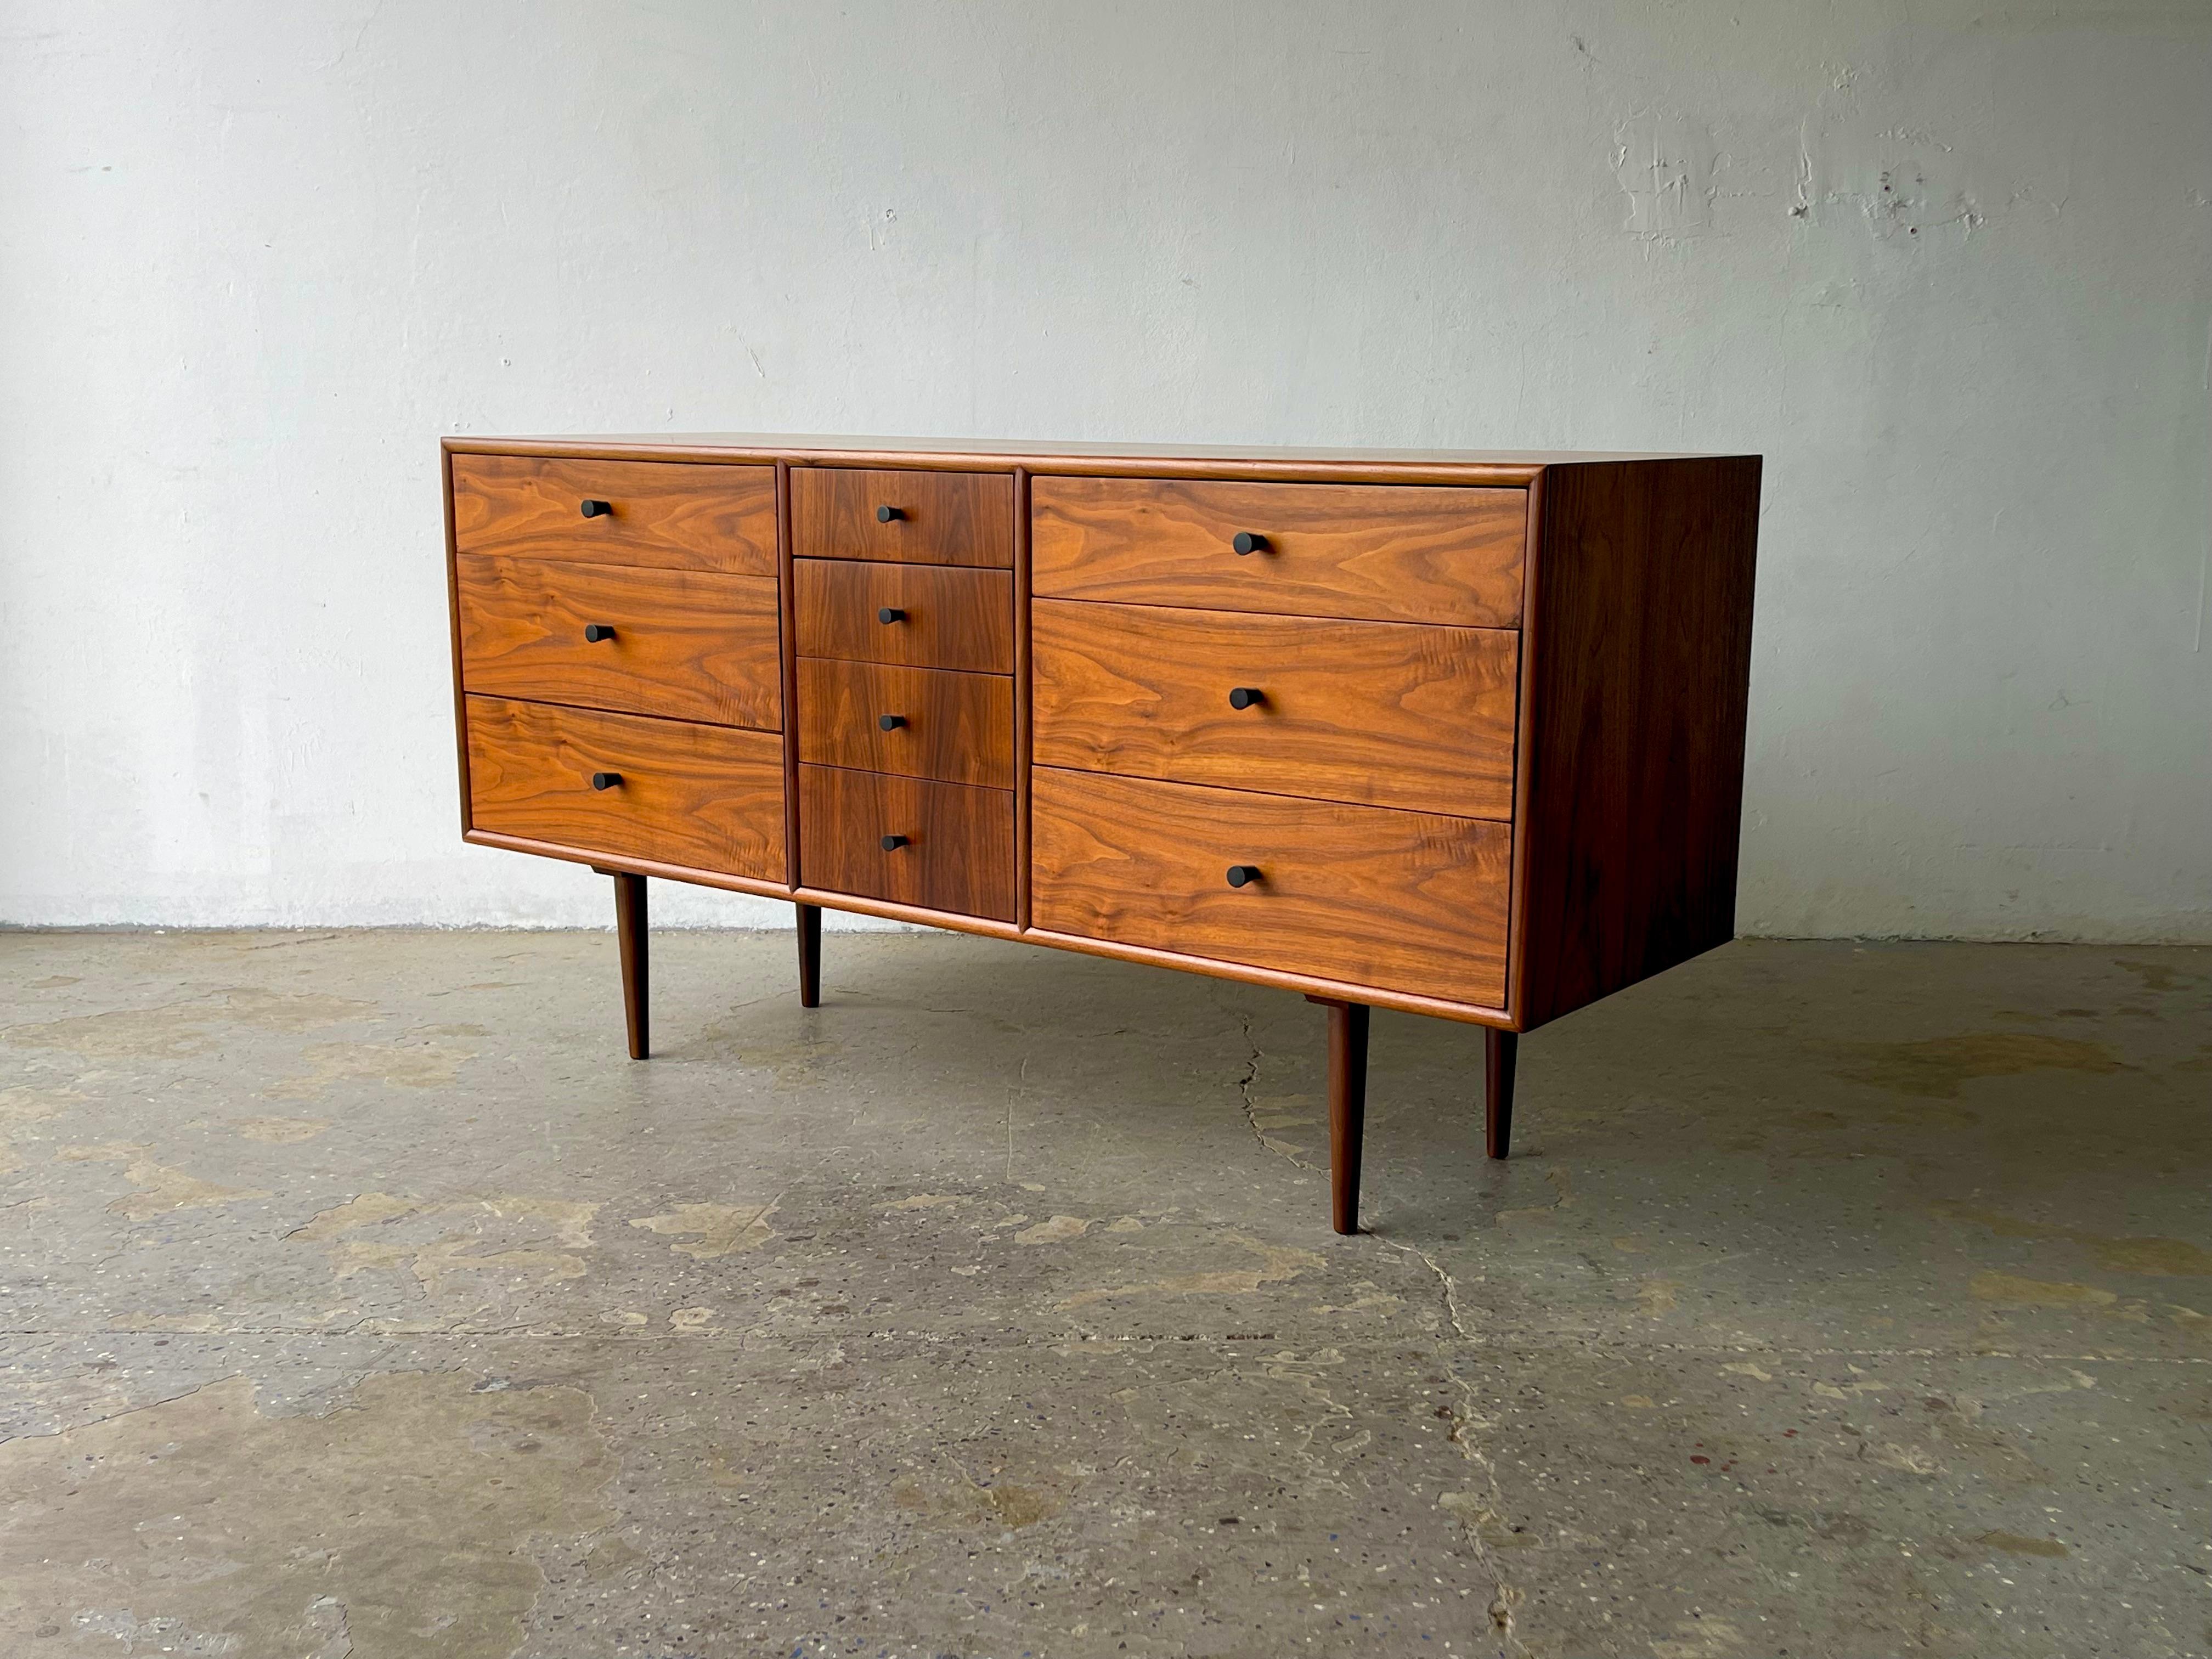 Mid-Century Modern walnut dresser designed by Kipp Stewart and Stewart McDougall for Drexel's Declaration collection. Exceptional quality dresser constructed from walnut. Features ten dovetailed drawers. Featuring four small drawers in the center